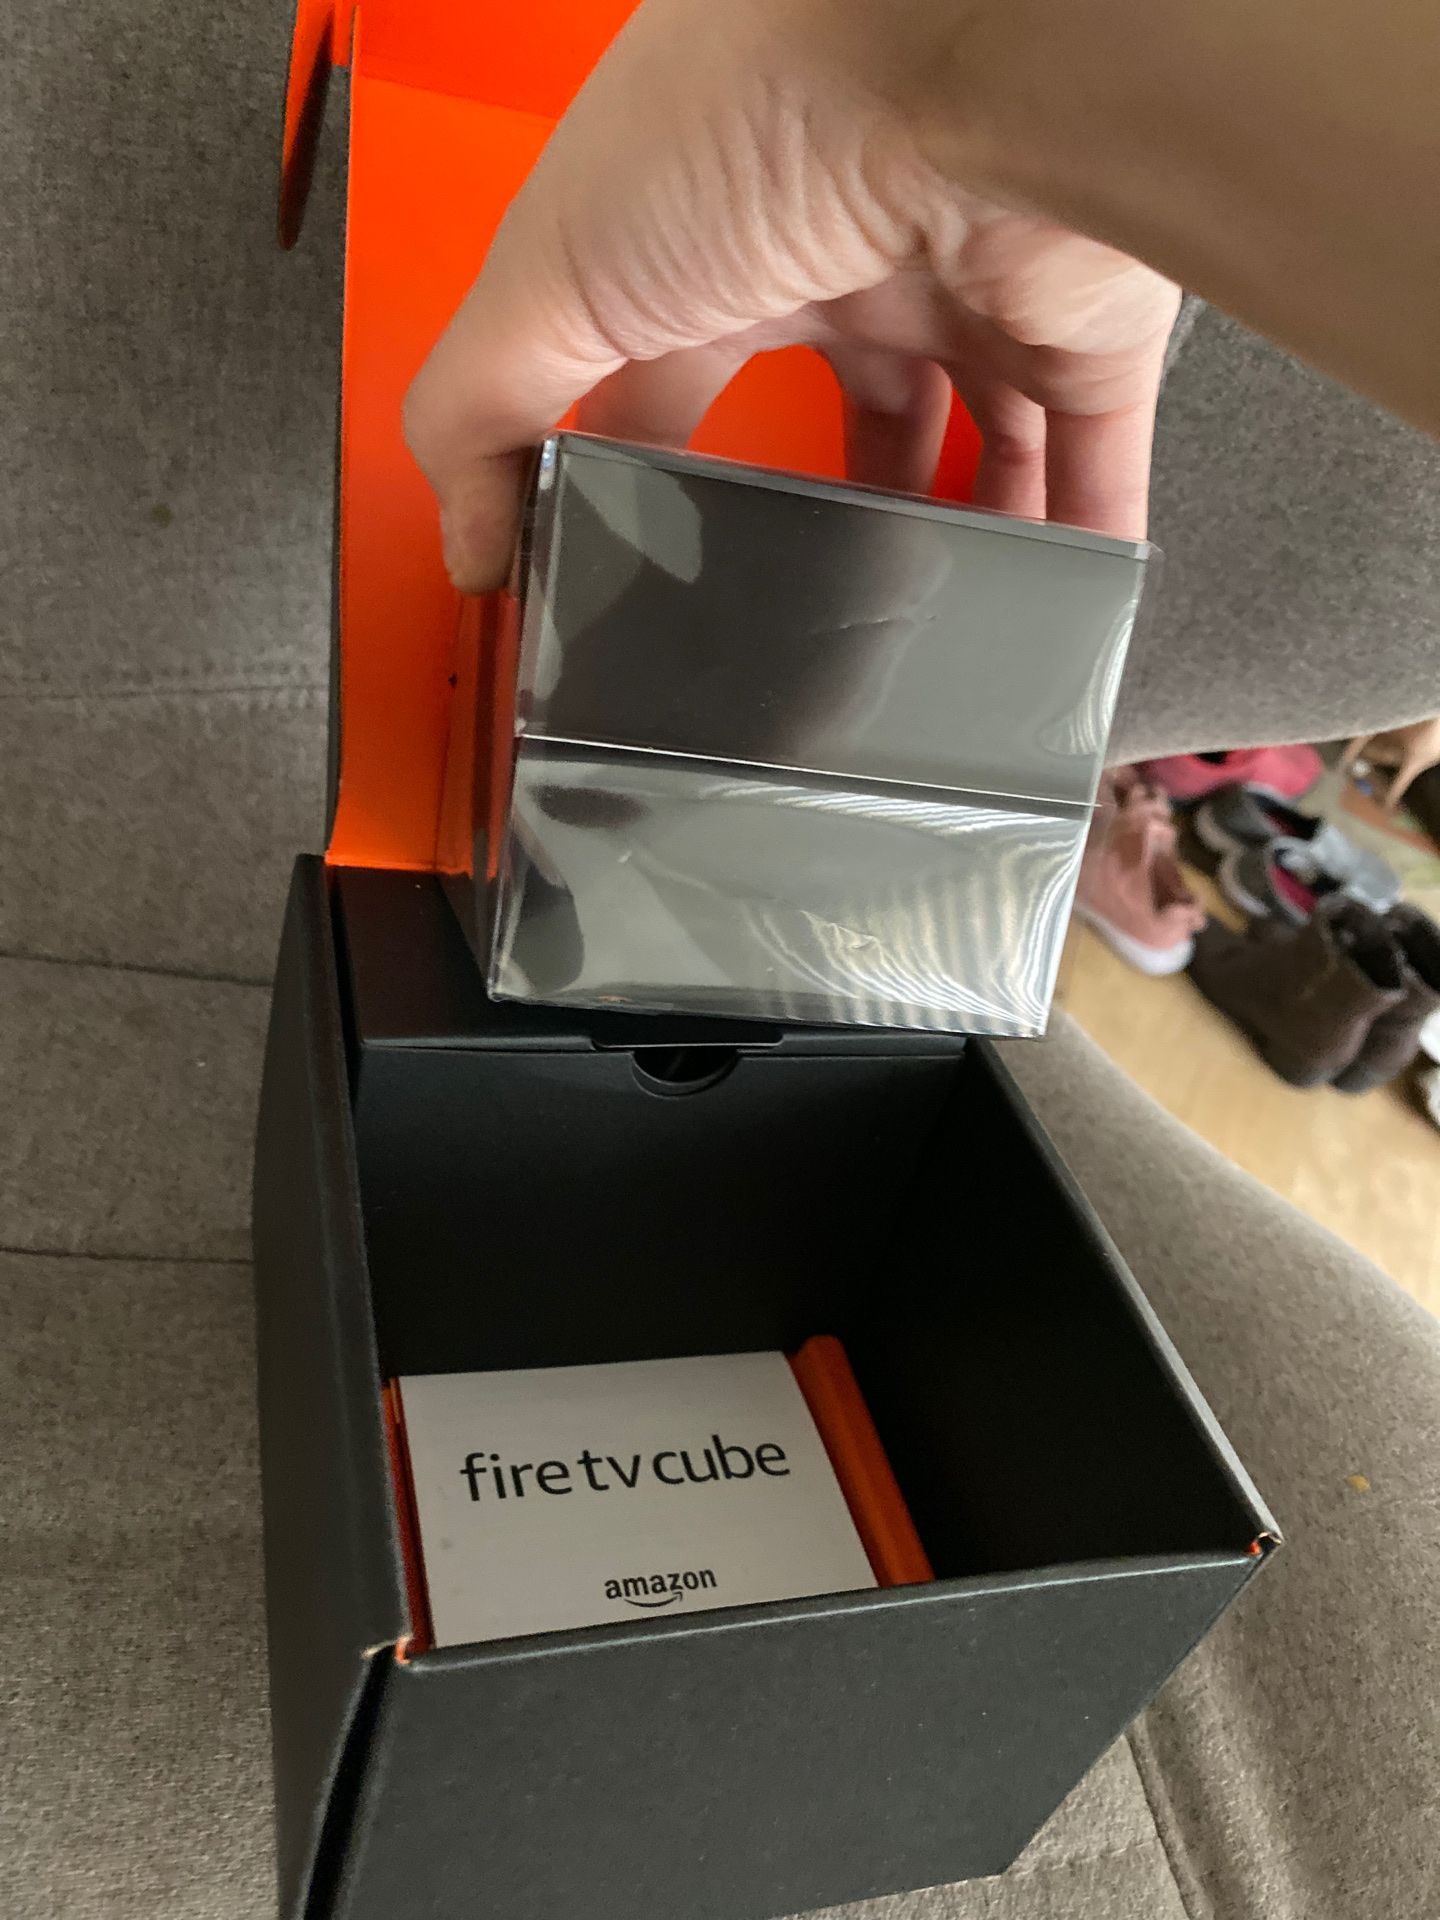 Fire tv cube amazon brand new still wrapped